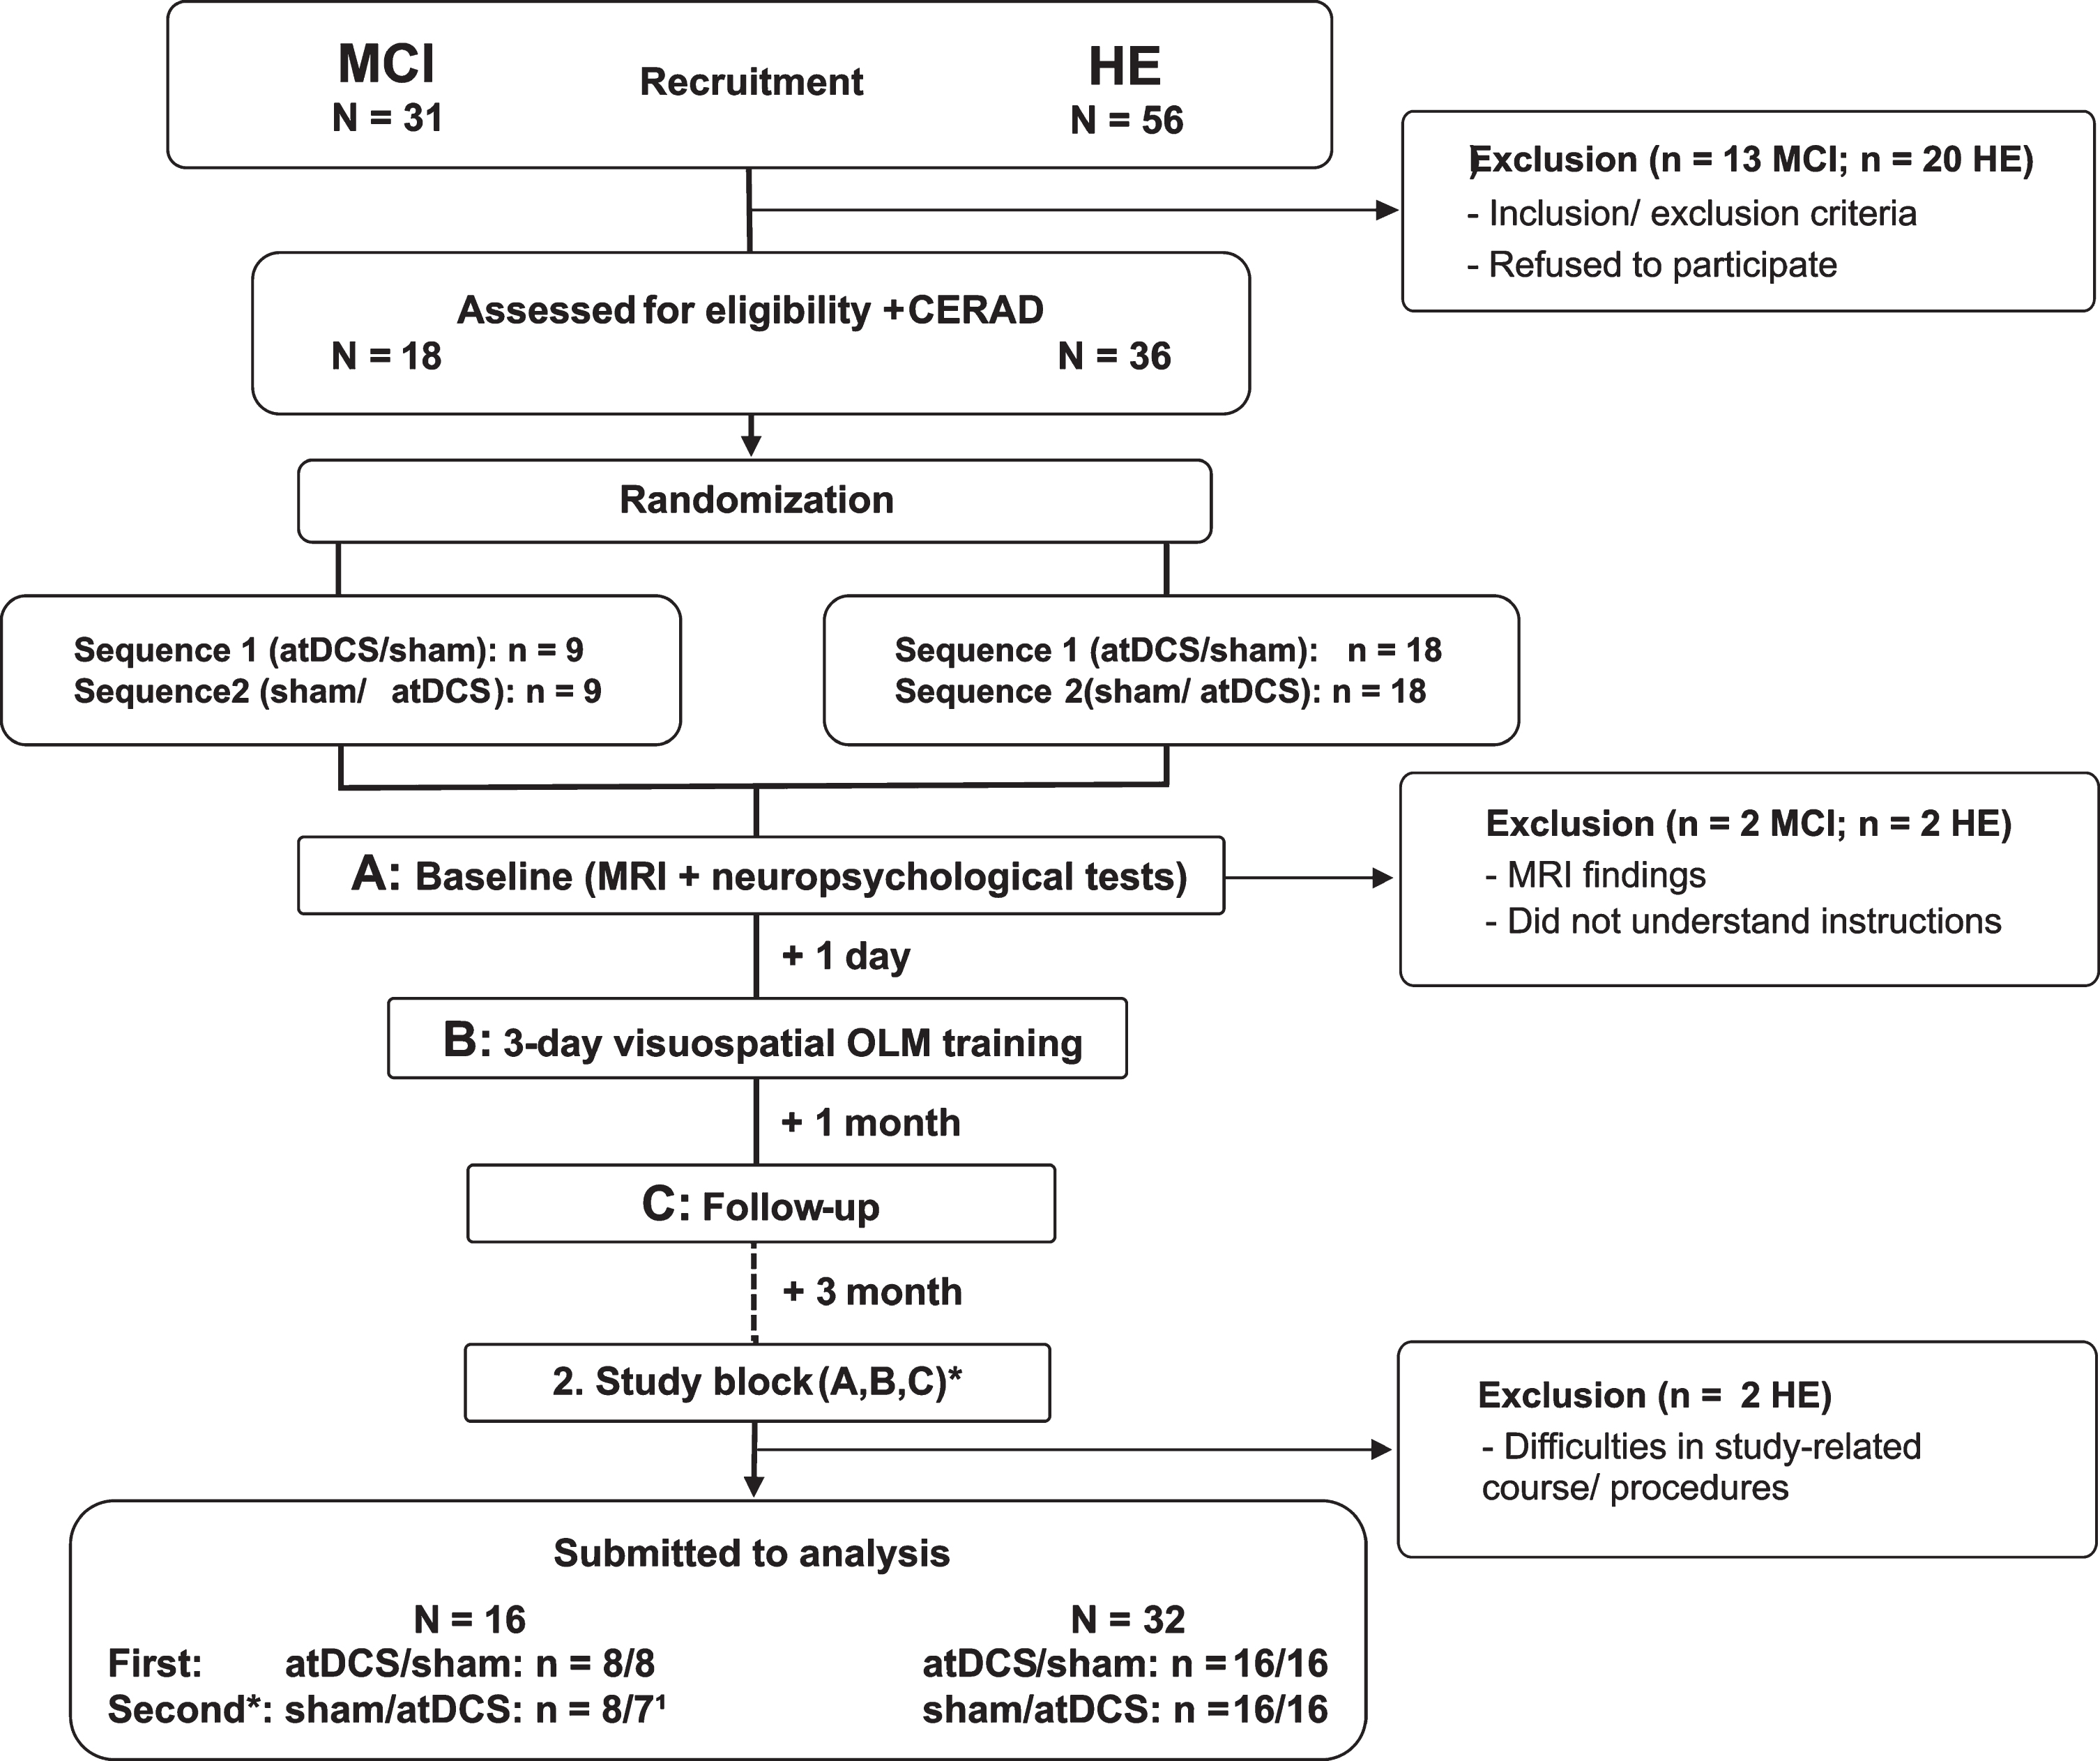 Flowchart of cross-over studies including patients with mild cognitive impairment (MCI) and healthy elderly (HE). Thirty-one patients with mild cognitive impairment (MCI) and 56 healthy elderly (HE) were recruited and pre-screened. 13 MCI patients and 20 HE were excluded due to refusal or study-related constraints. One MCI patient and 2 HE matched exclusion criteria, and 1 MCI patient and 2 HE had to be excluded due to other difficulties, leaving 16 MCI patients and 32 HE for analysis. Participants were randomly assigned to either anodal transcranial direct stimulation (atDCS) or sham stimulation (sham) condition, which was applied simultaneous to training. *In the second study block, the same procedures were conducted, but according to a cross-over design training was done under the other (not yet applied) stimulation condition. 1Due to technical problems one MCI patient did not received the same training versions across training days during the second study block. Thus, performance data has to be excluded from analysis. Hence, n for MCI patients differed between study blocks.